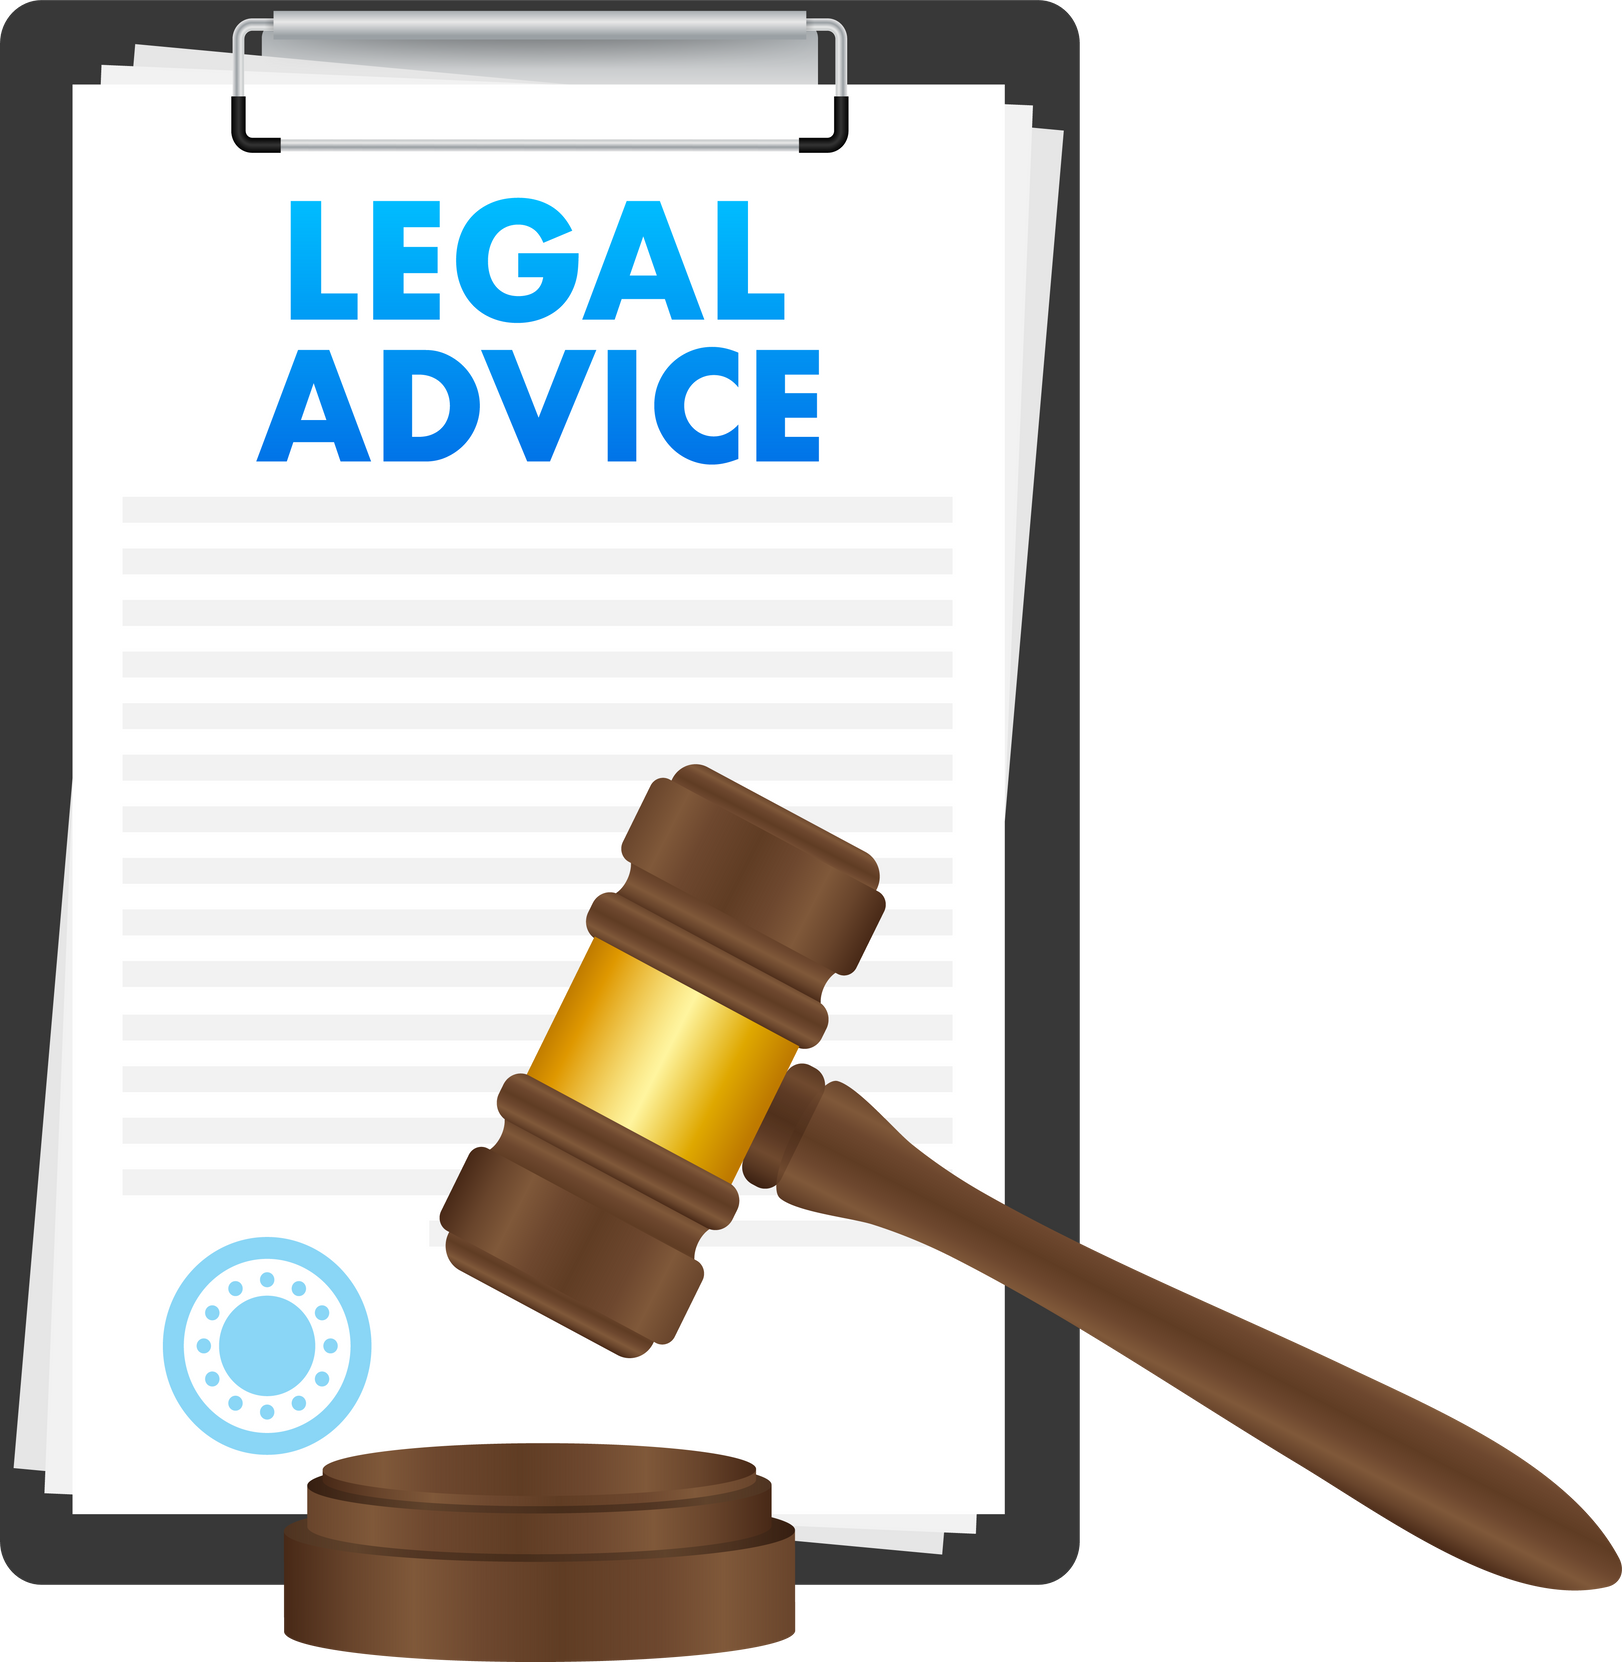 Legal advice. Justice, consultation. Client questions. Online lawyer assistance. Vector stock illustration.